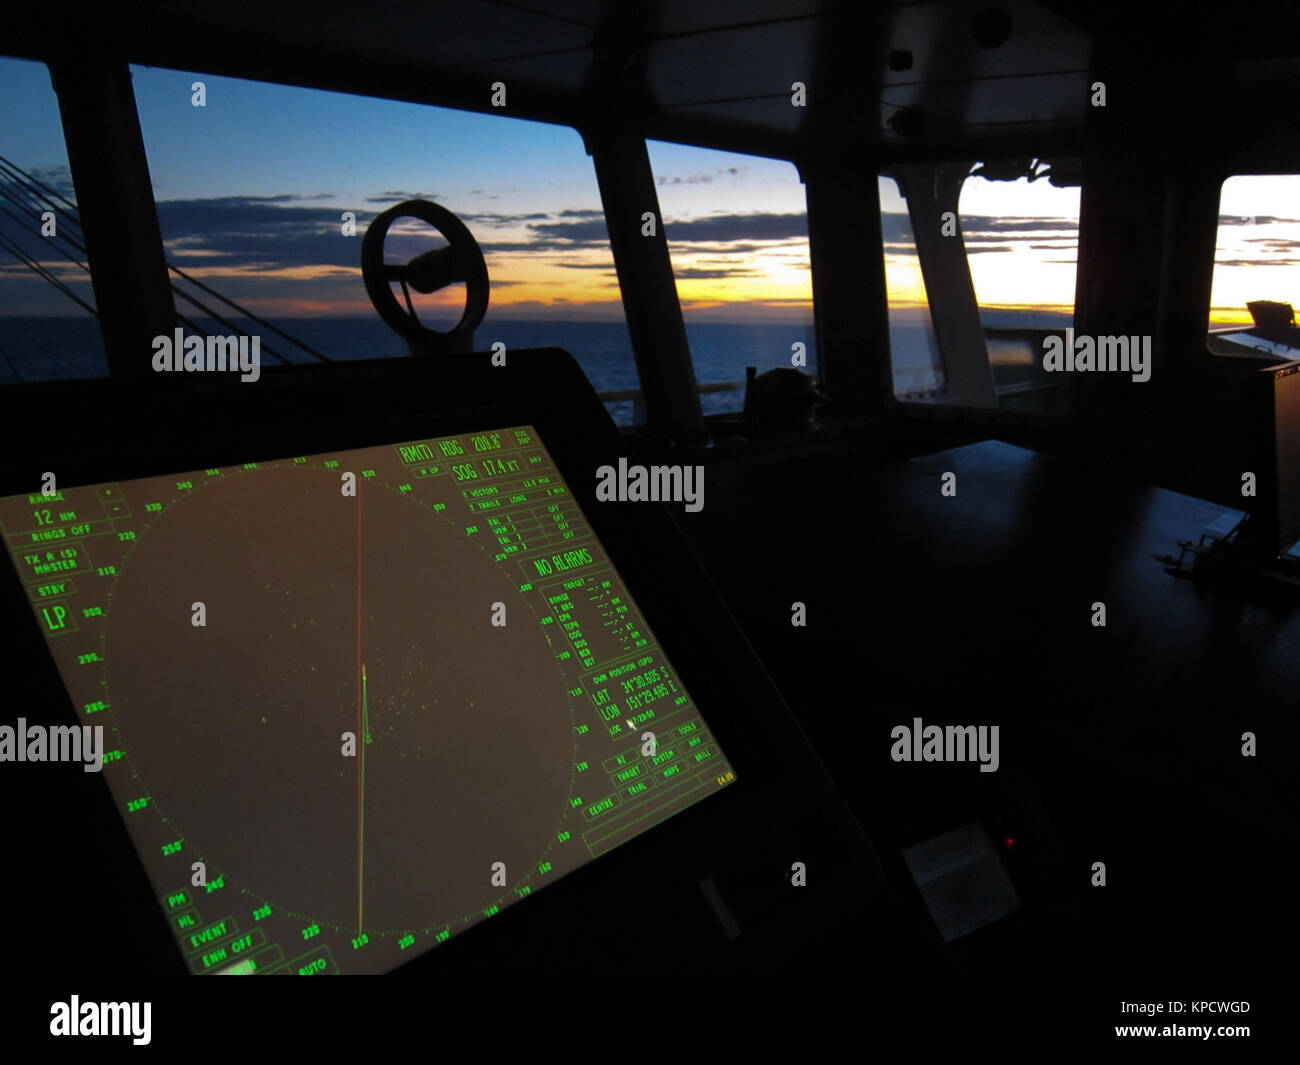 View From Ship's Bridge at Dusk with Radar Display Stock Photo